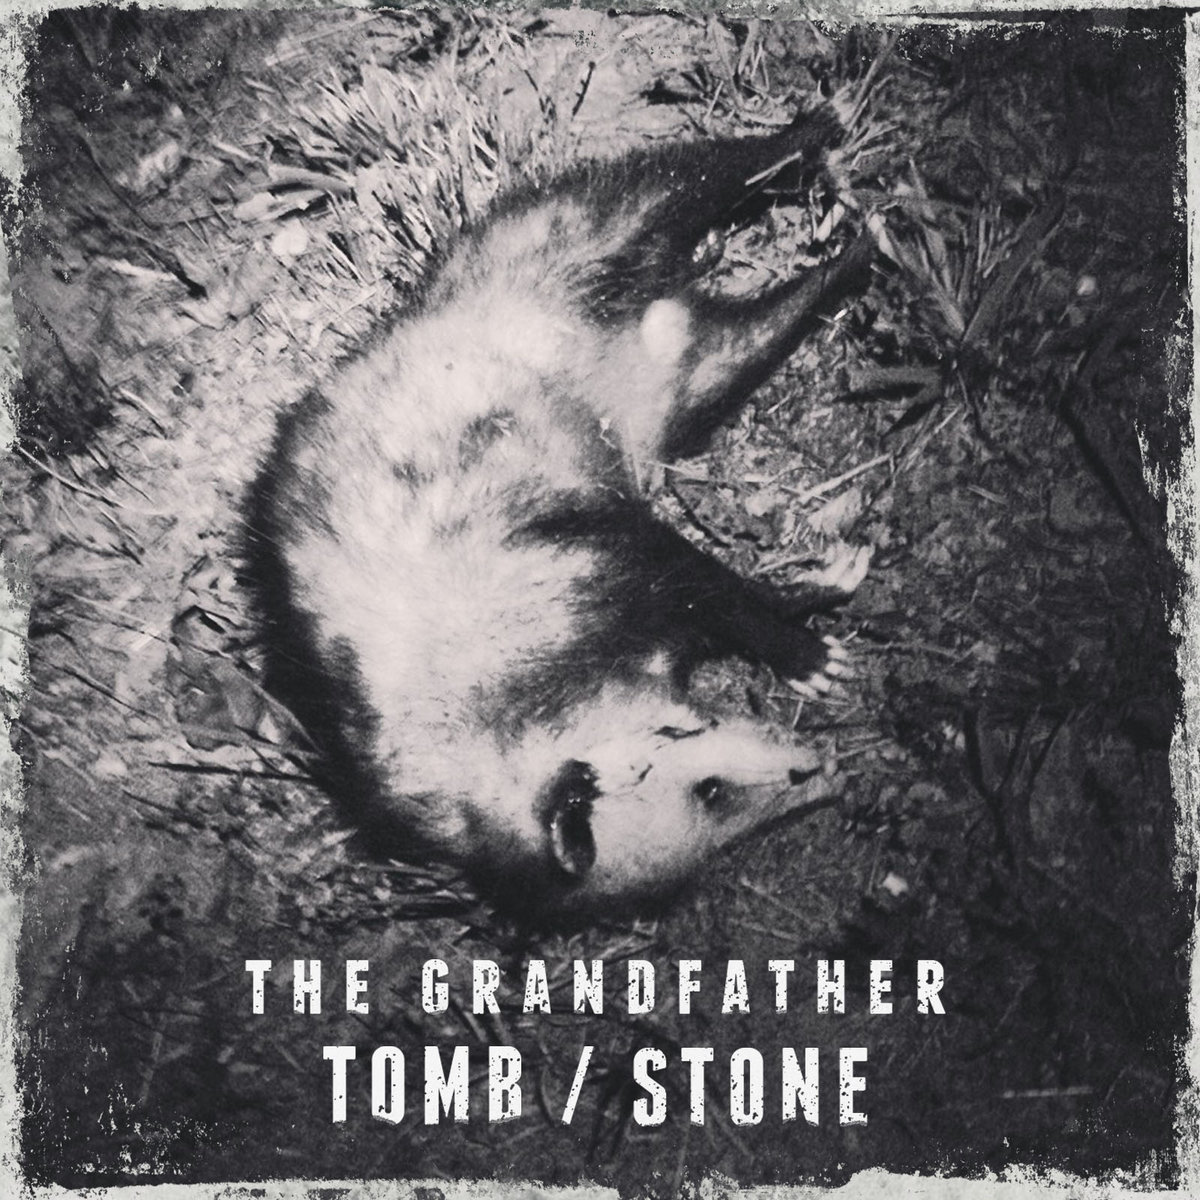  The Grandfather – Tomb/Stone